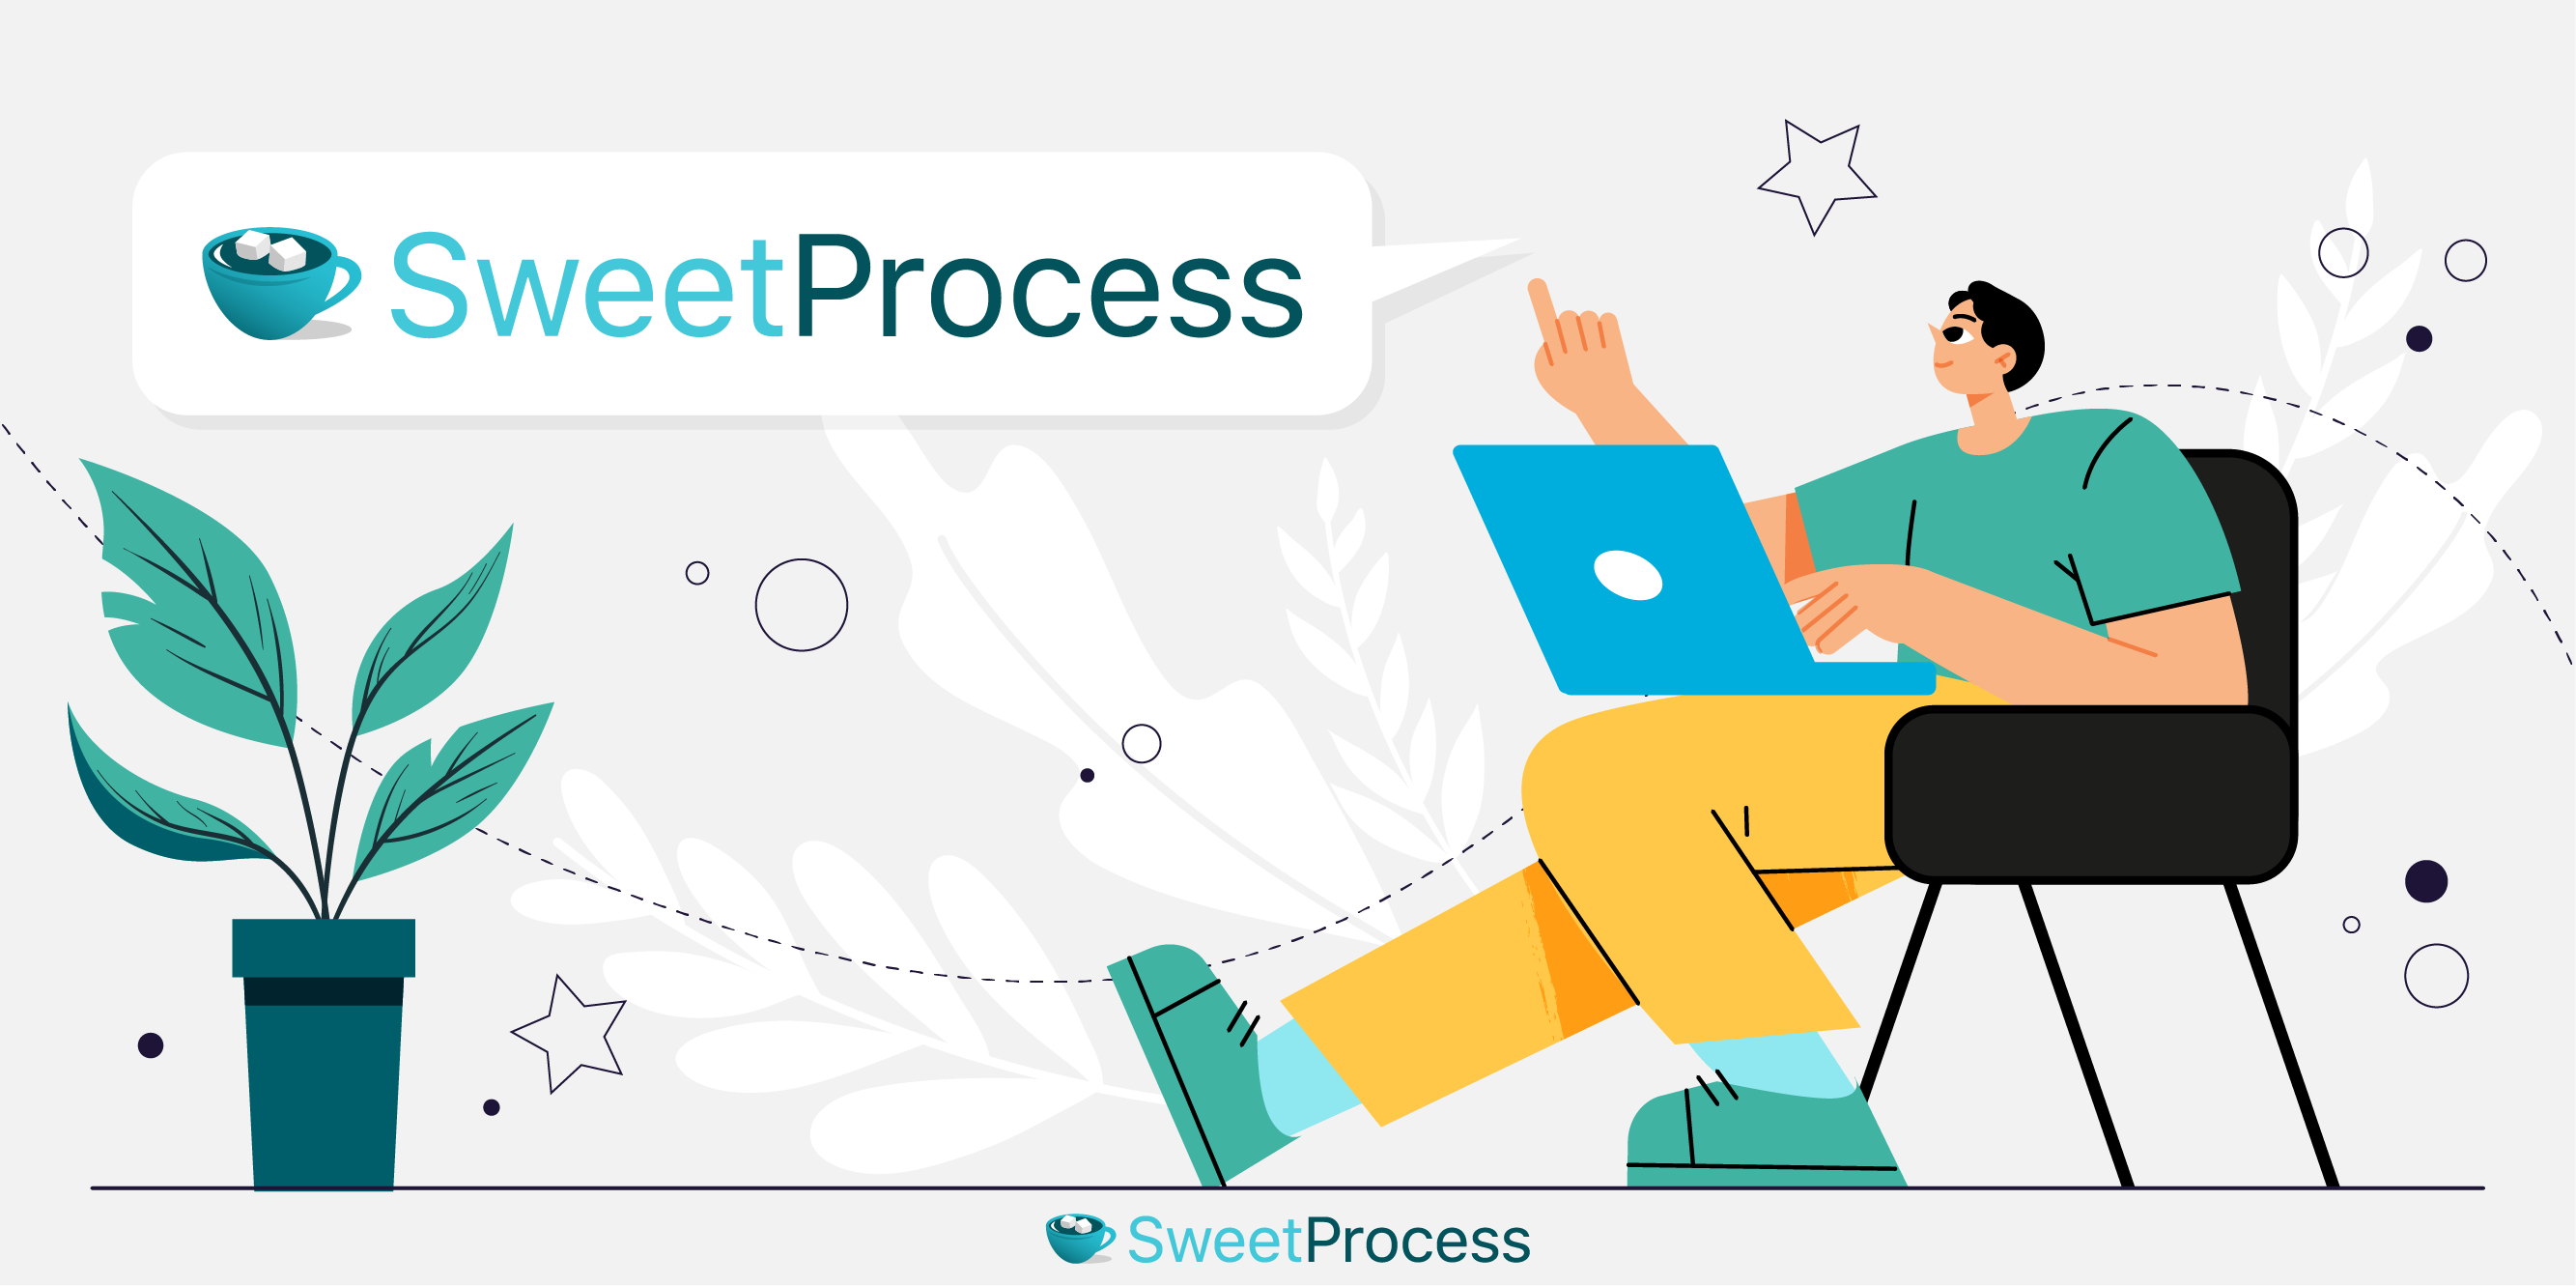 SweetProcess: A Sweet Overview